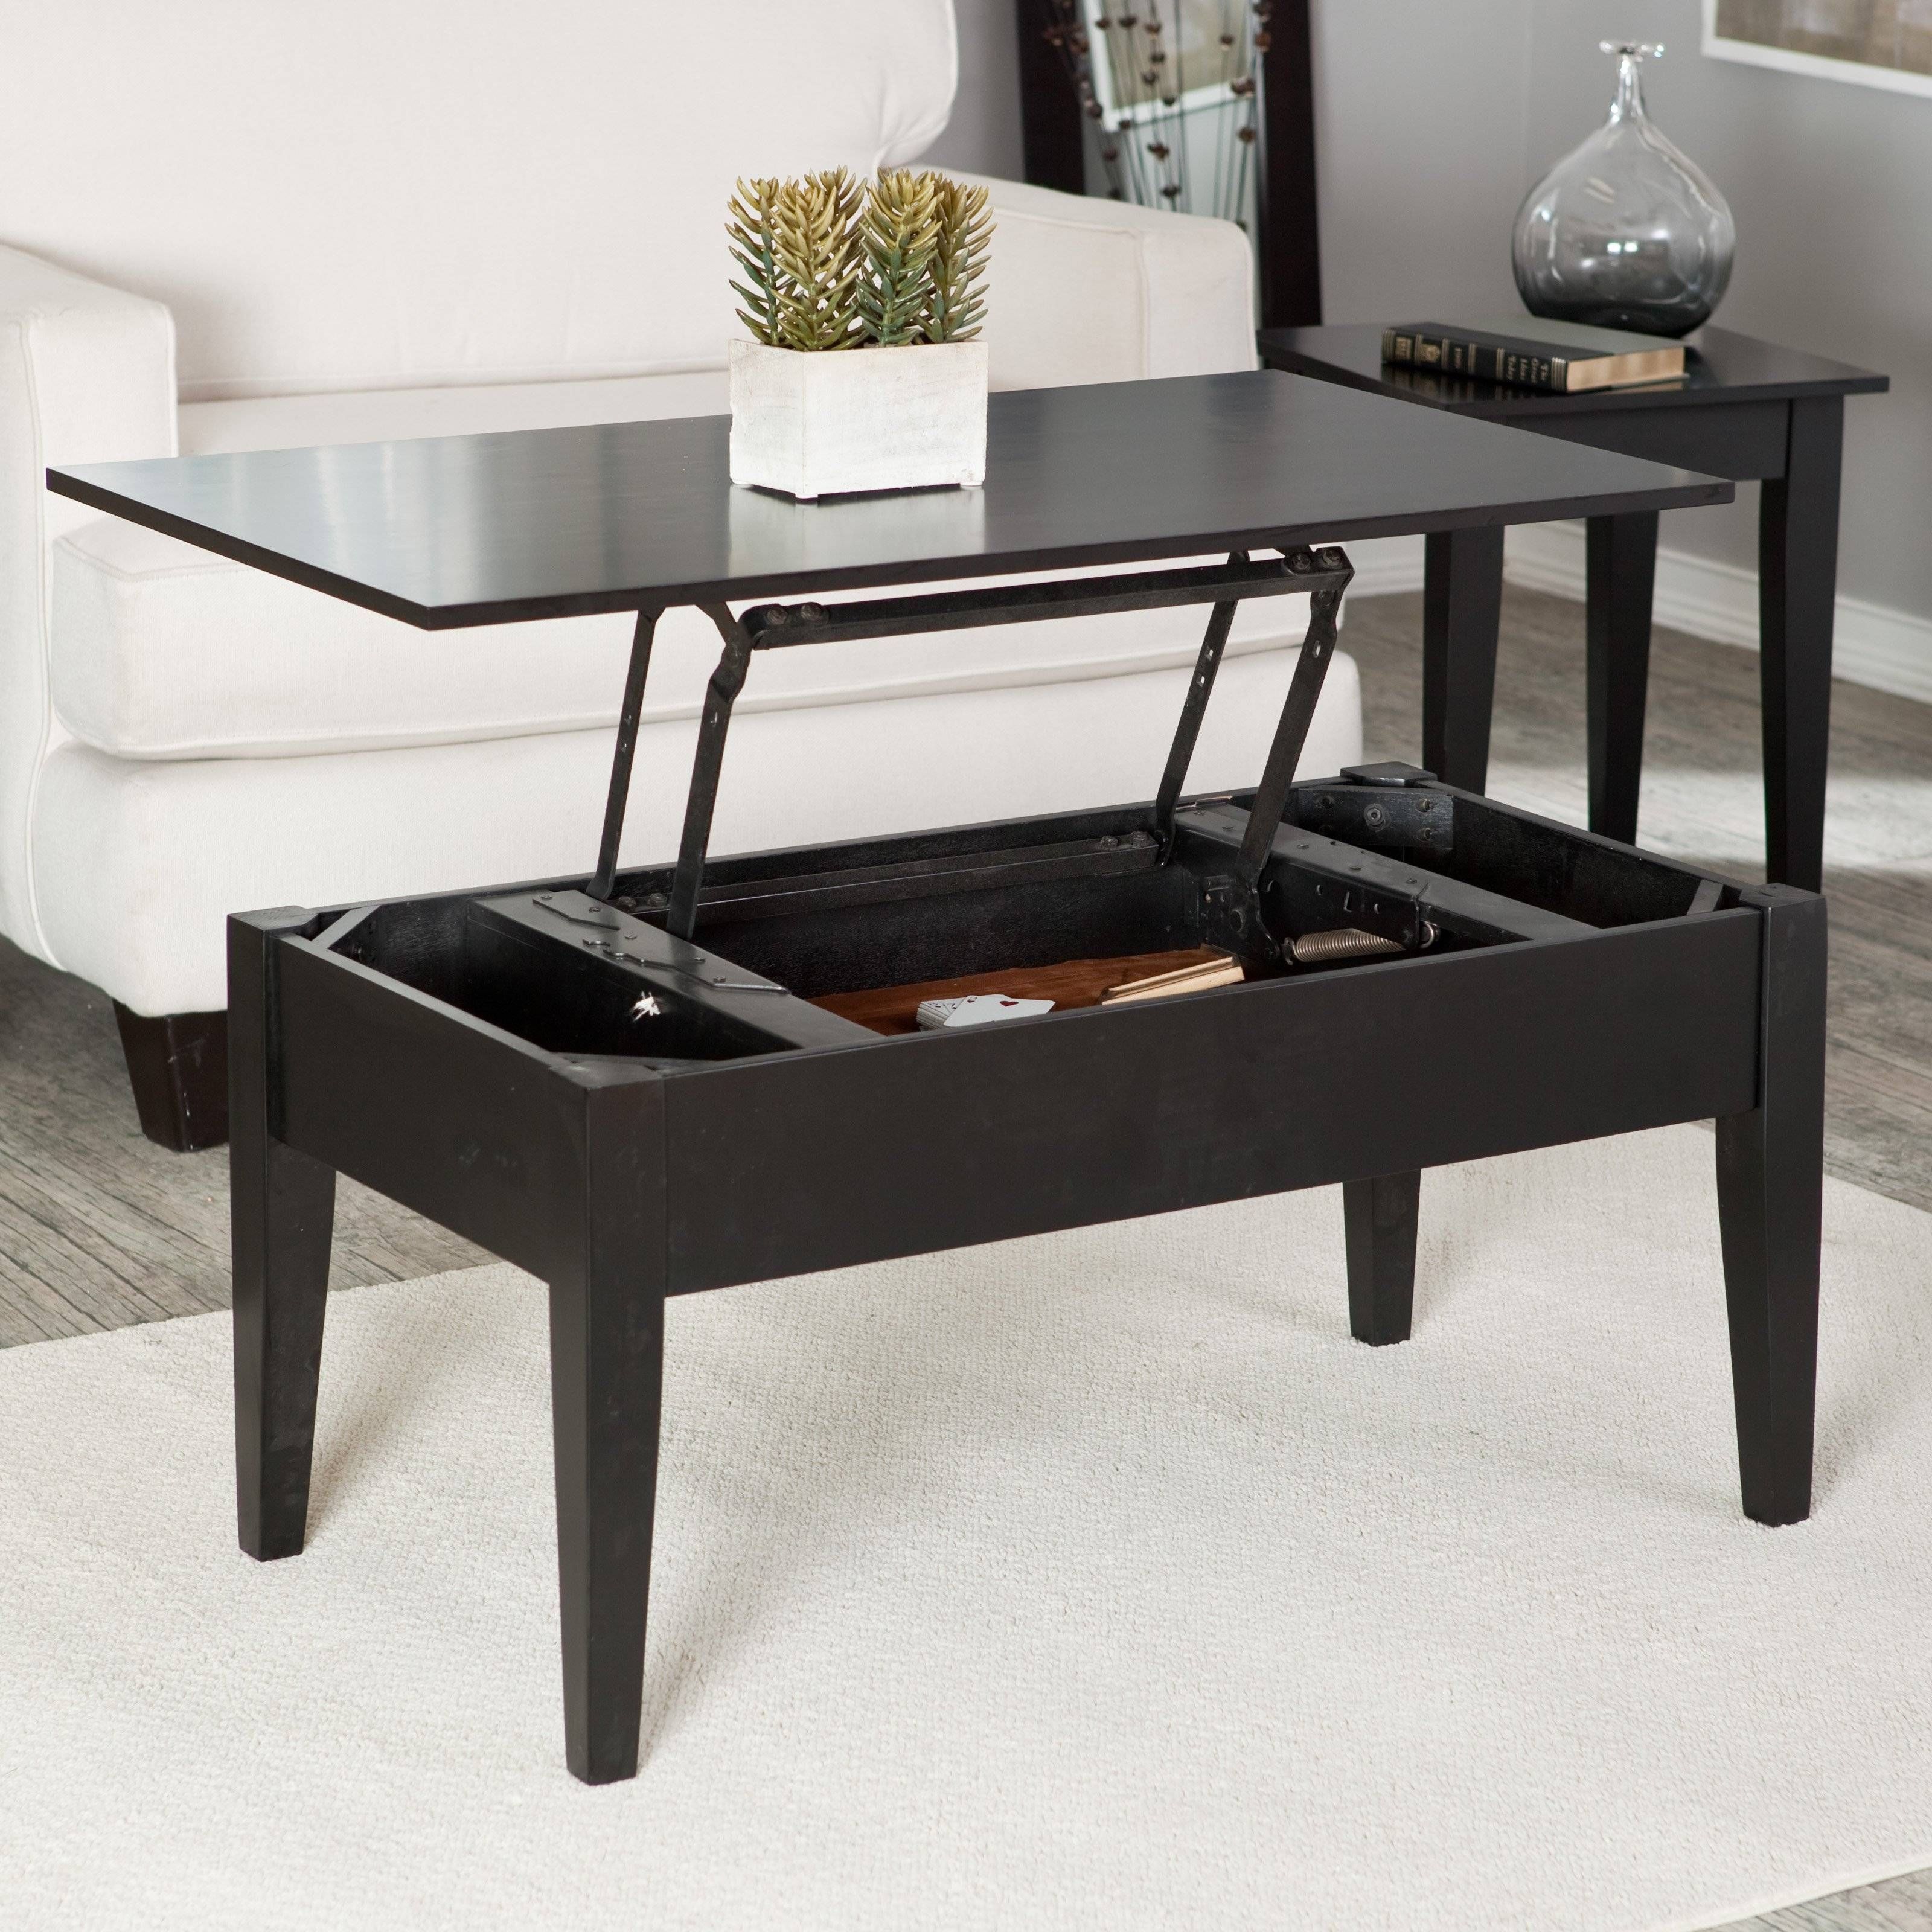 Turner Lift Top Coffee Table – Espresso | Hayneedle Within Coffee Table With Raised Top (View 2 of 30)